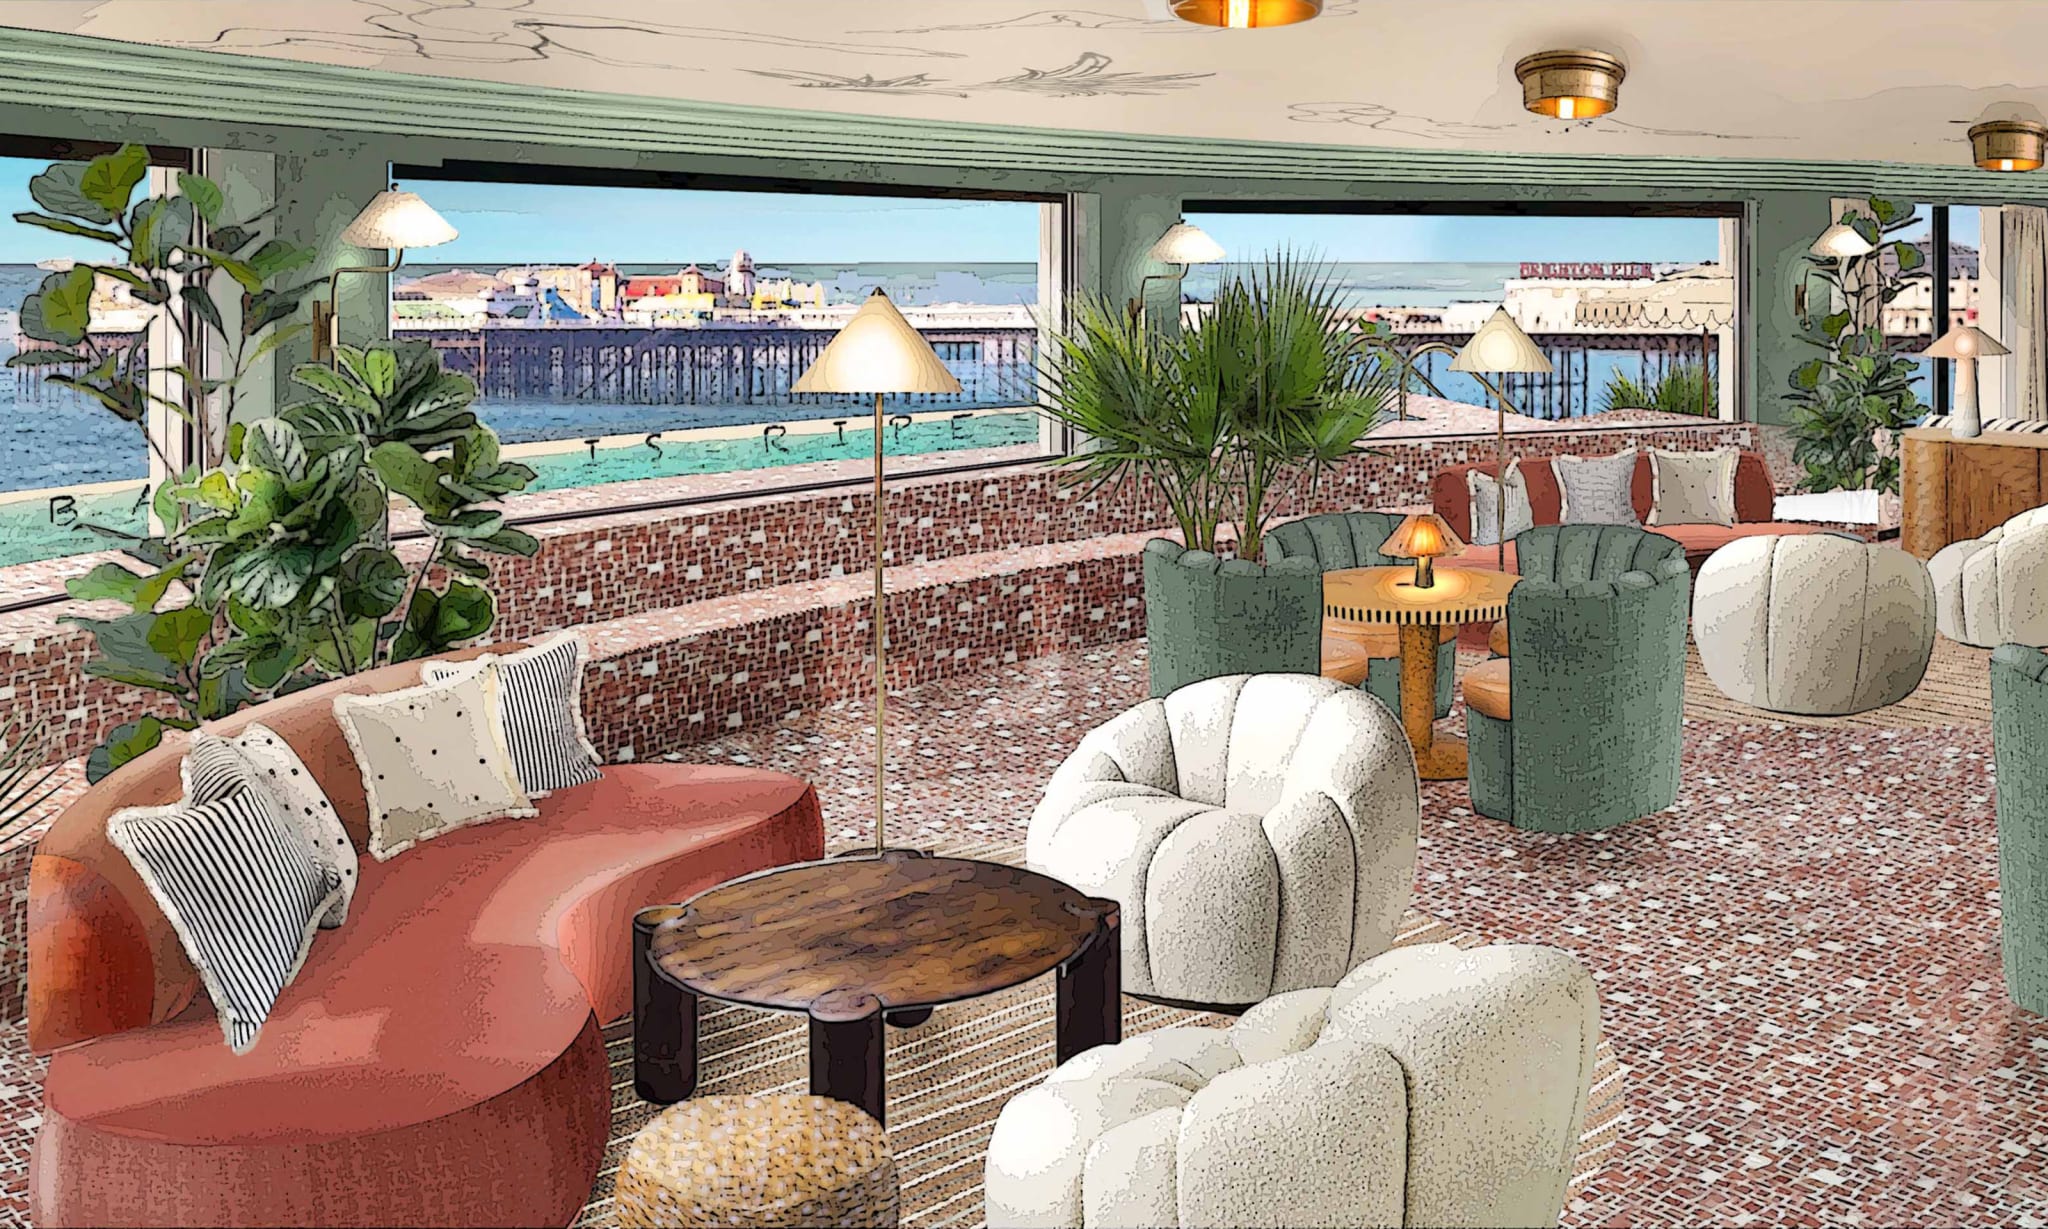 Soho House opens in Brighton this month